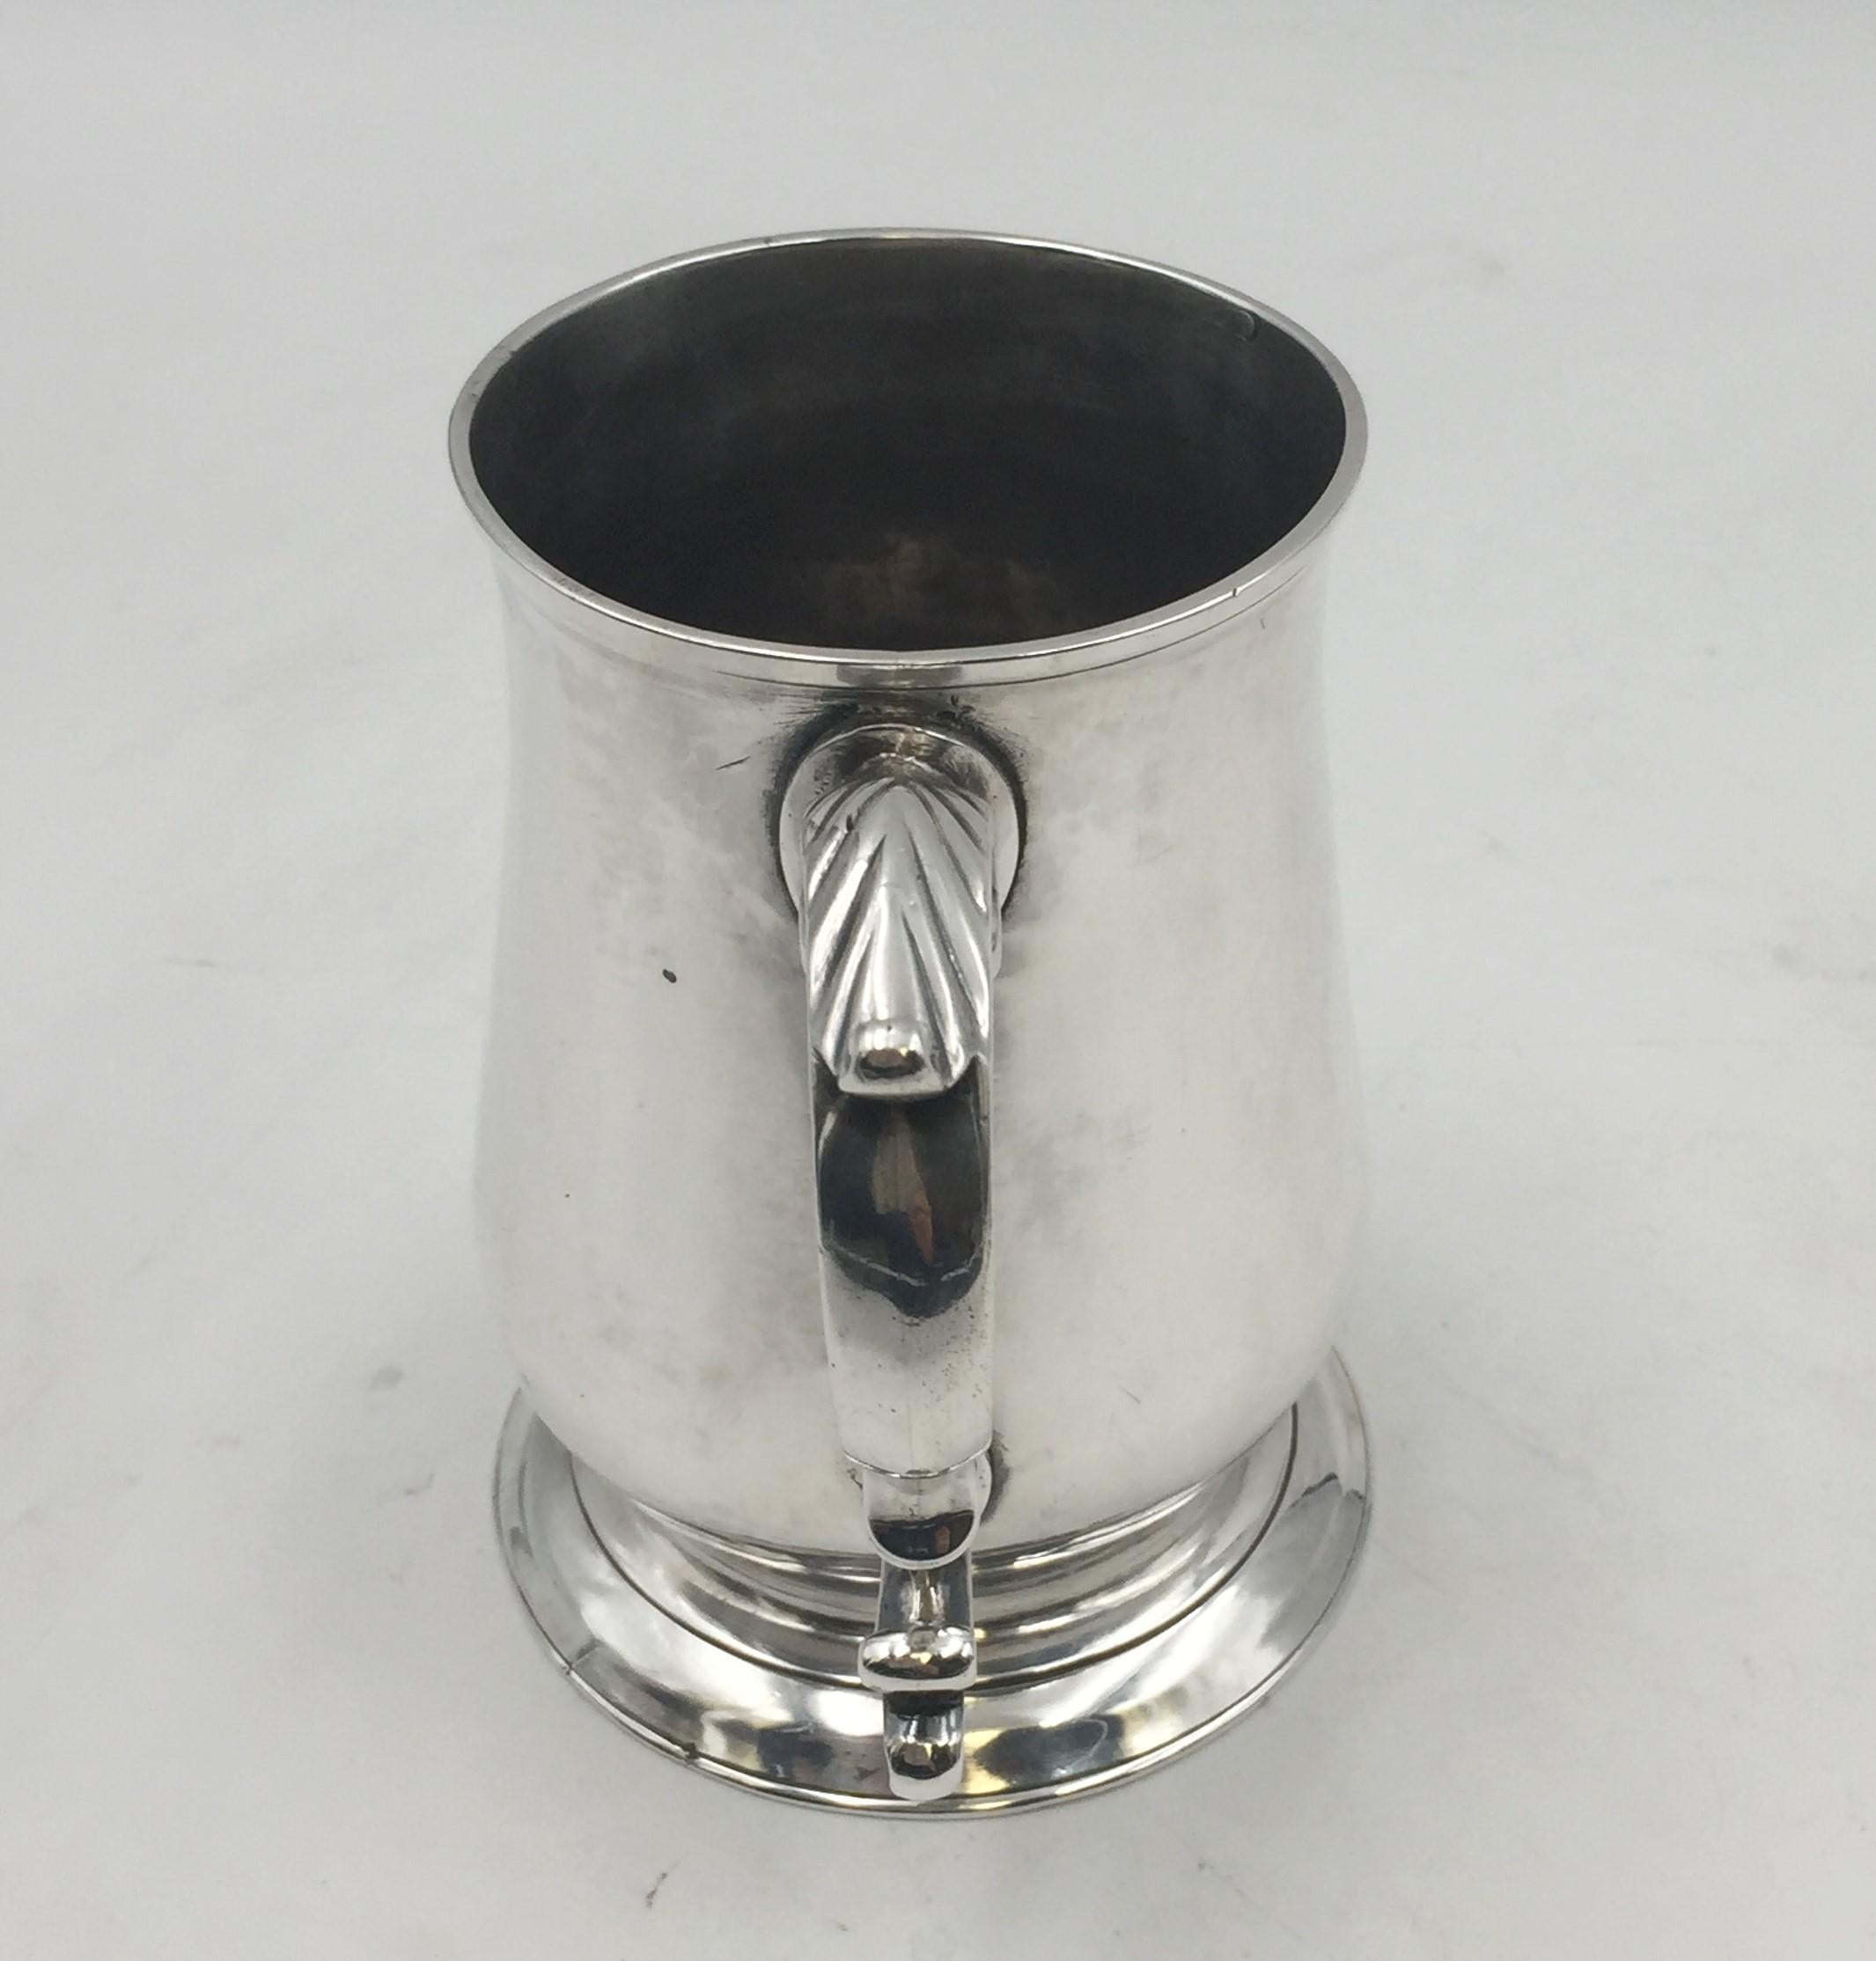 1788 sterling silver tankard mug by John Kelly, a London-based silversmith, from the Georgian era with applied decorations on the handle and in beautiful, elegant design. It measures 4 7/8'' in height by 3 1/2'' in base diameter, weighs 10 ozt, and